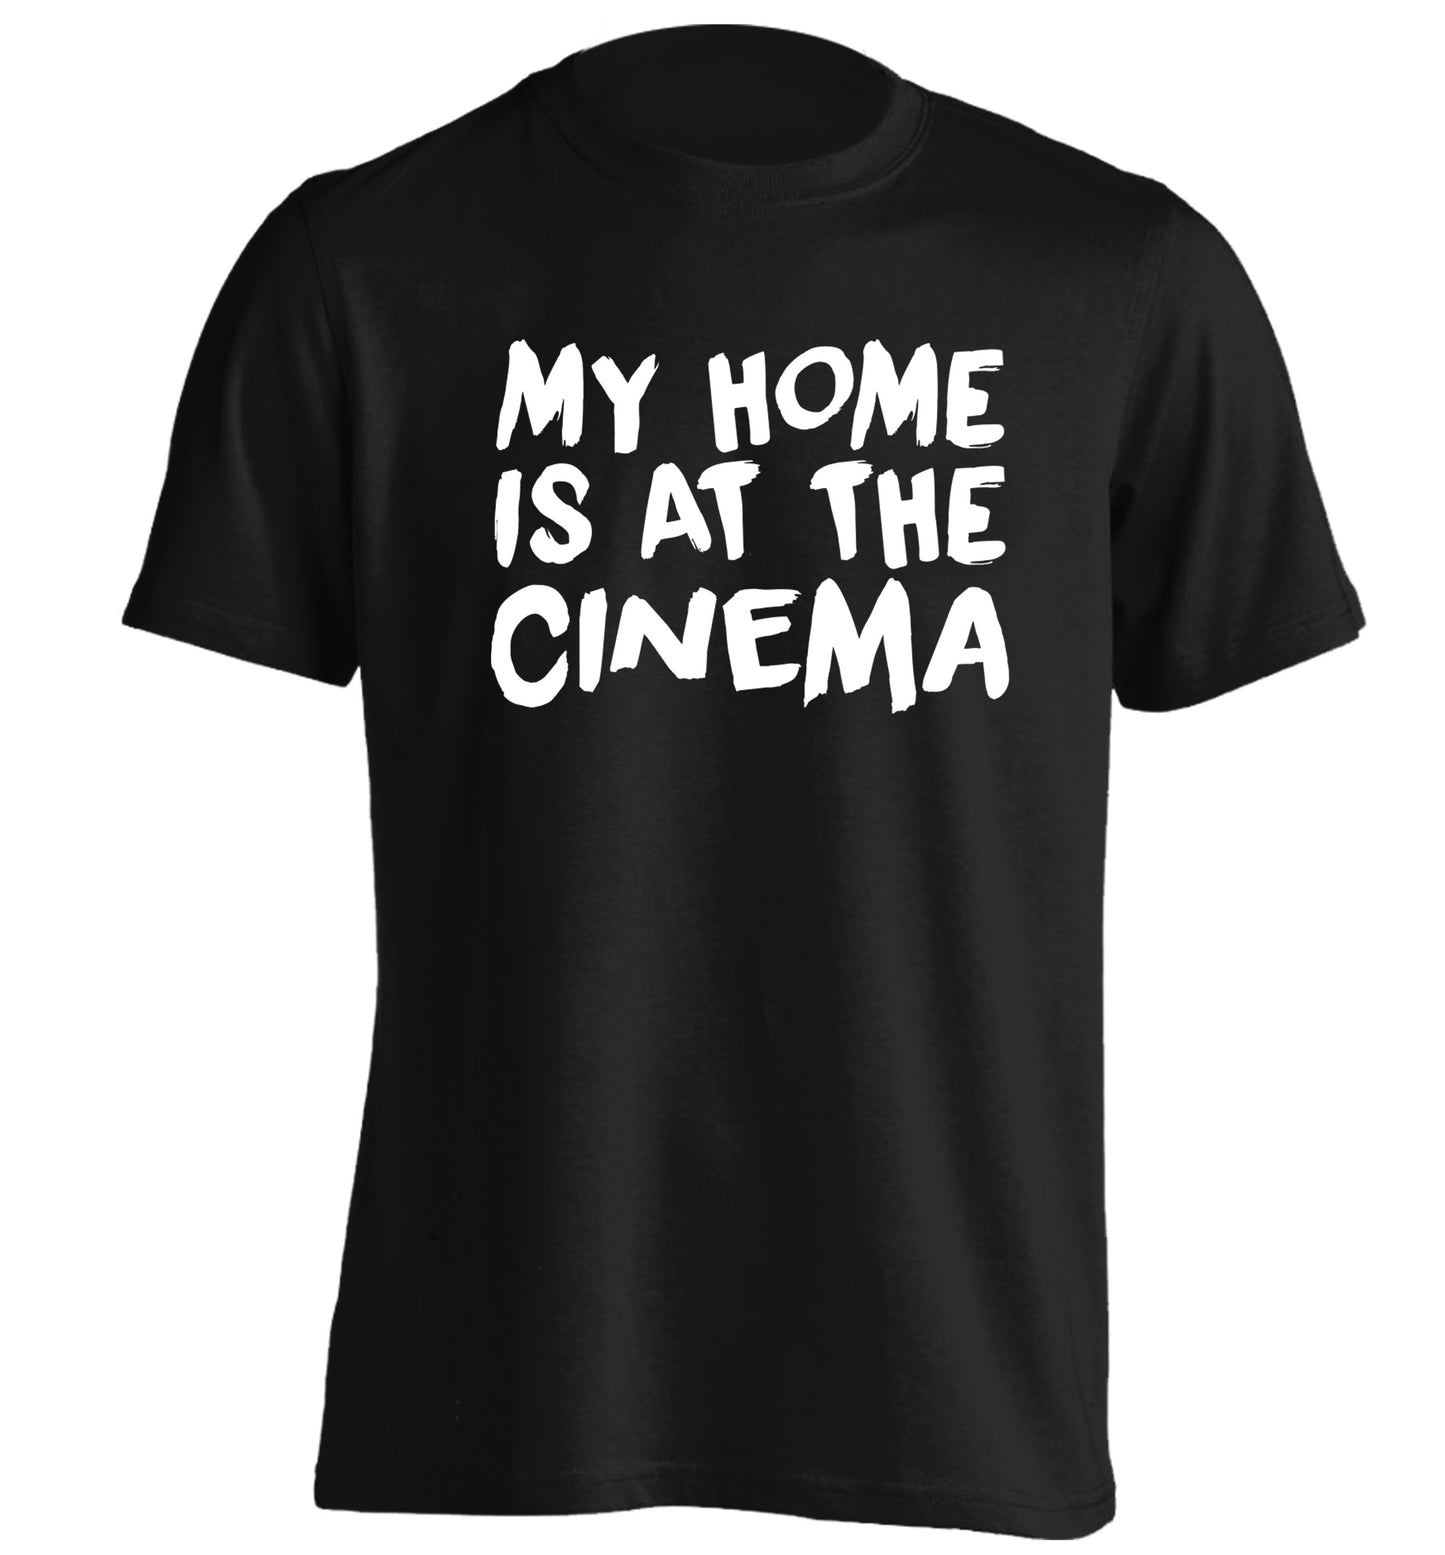 My home is at the cinema adults unisex black Tshirt 2XL